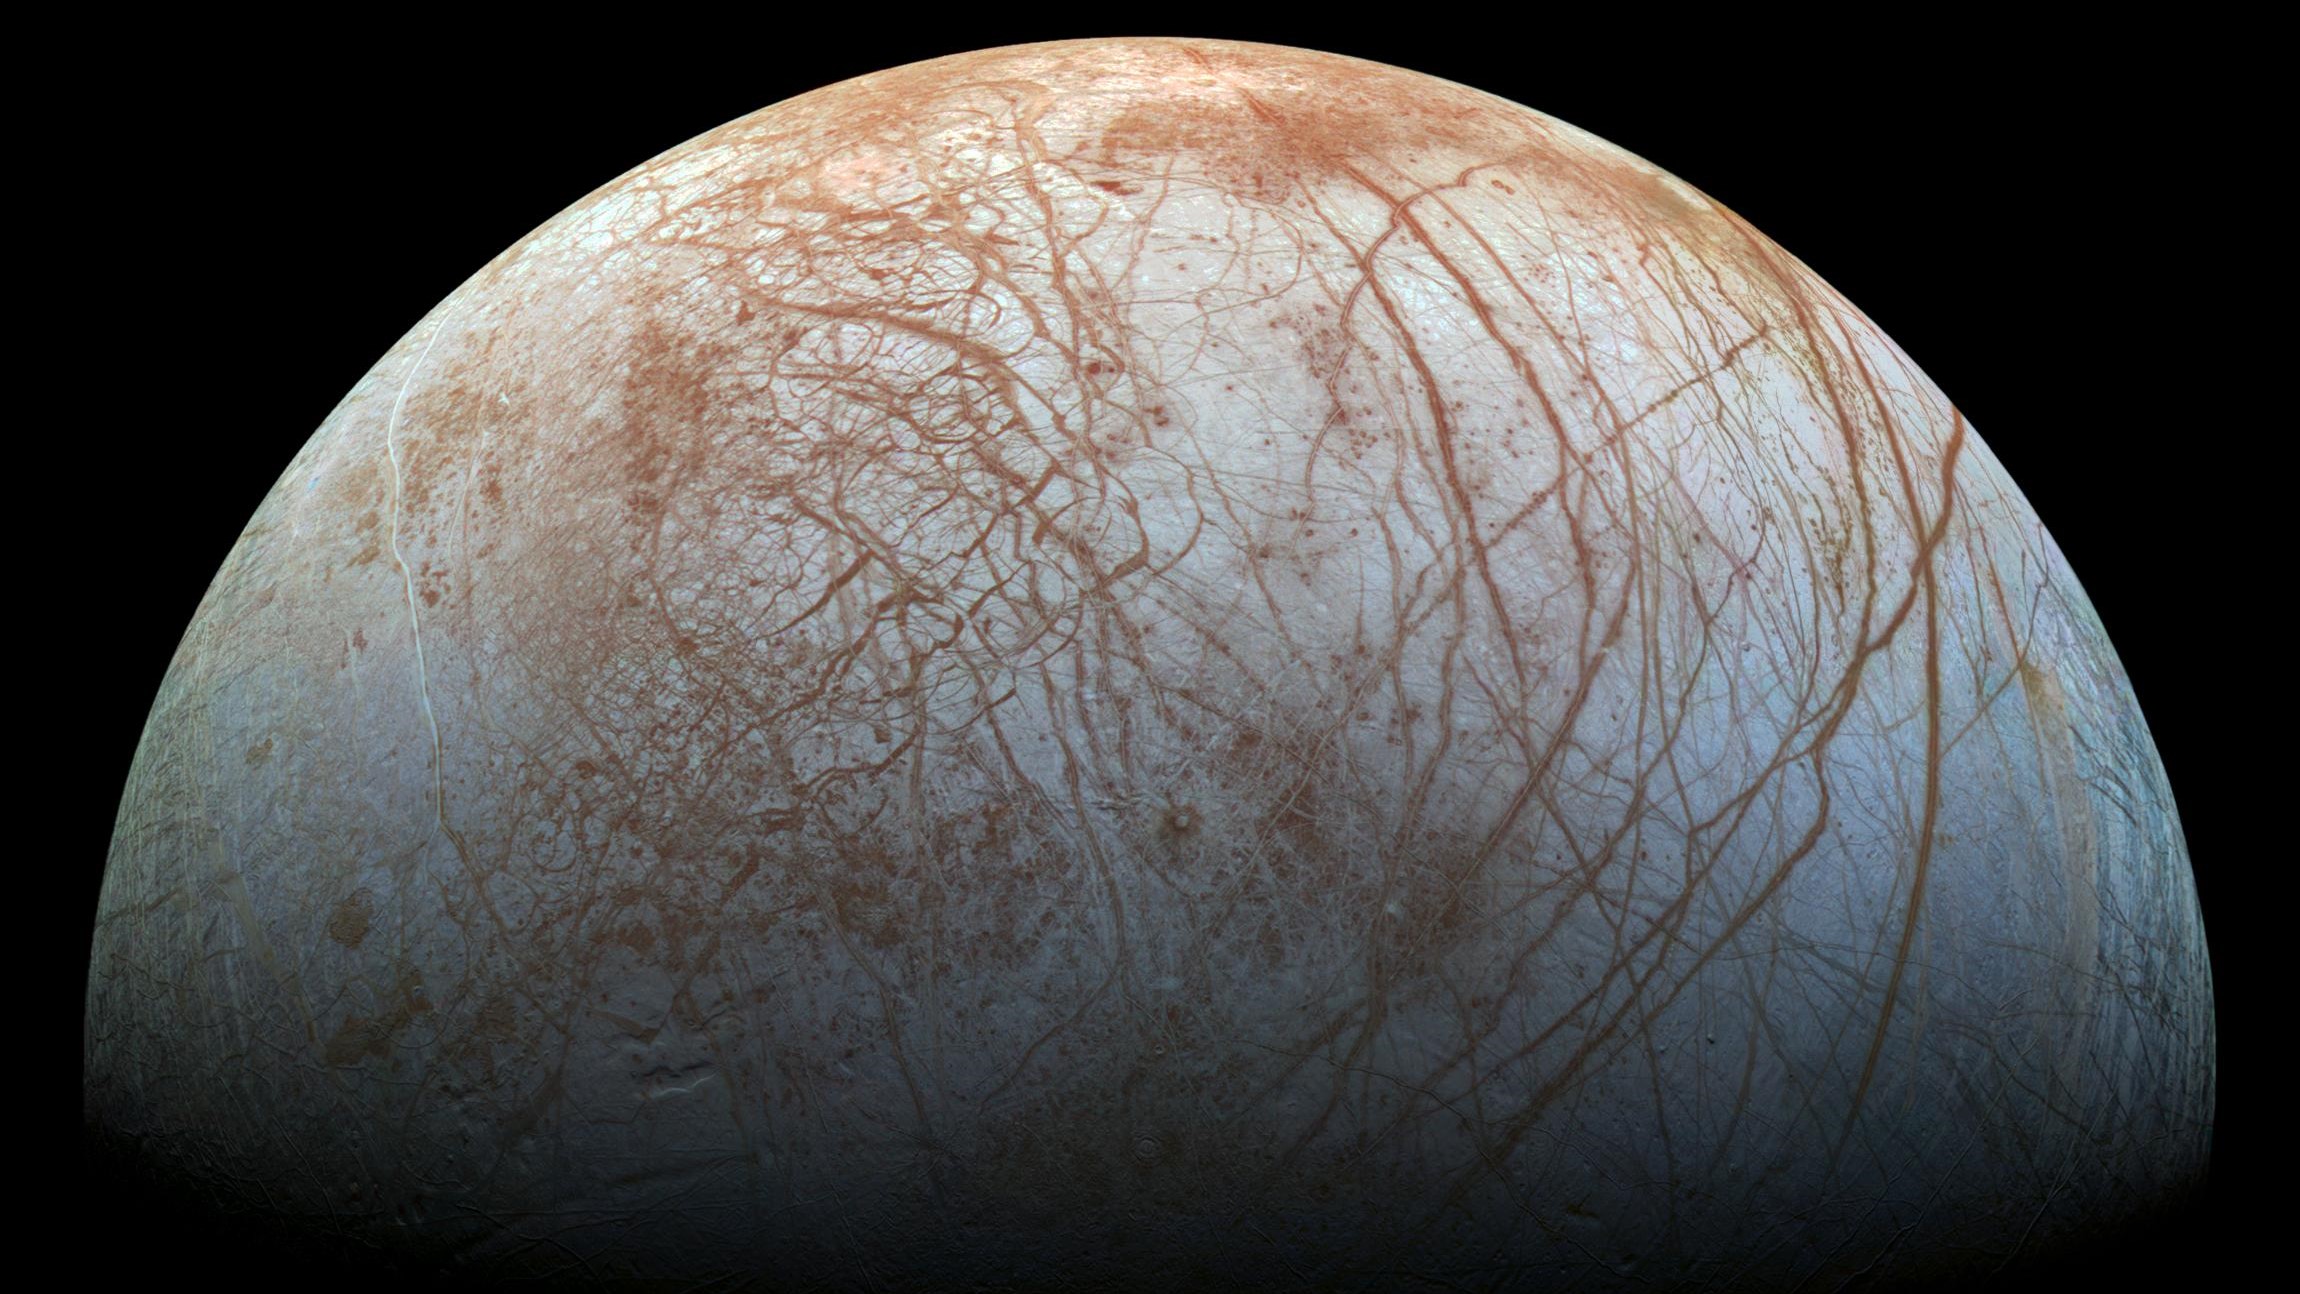 The surface of Europa shows linear cracks and ridges across the surface